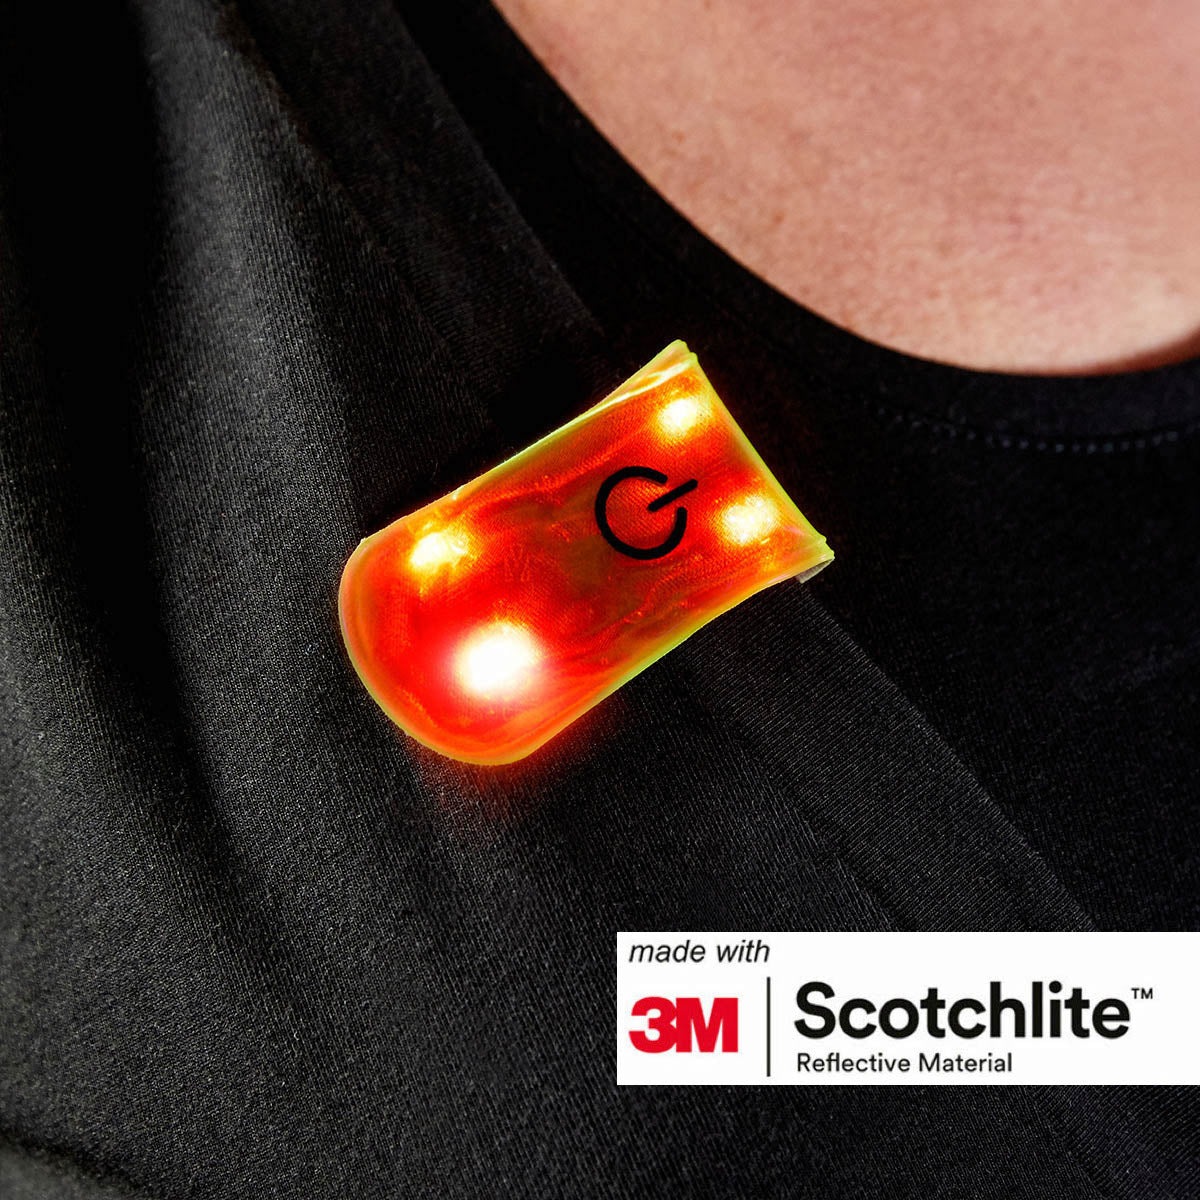 Close up of clip on LED light attached to clothing. 